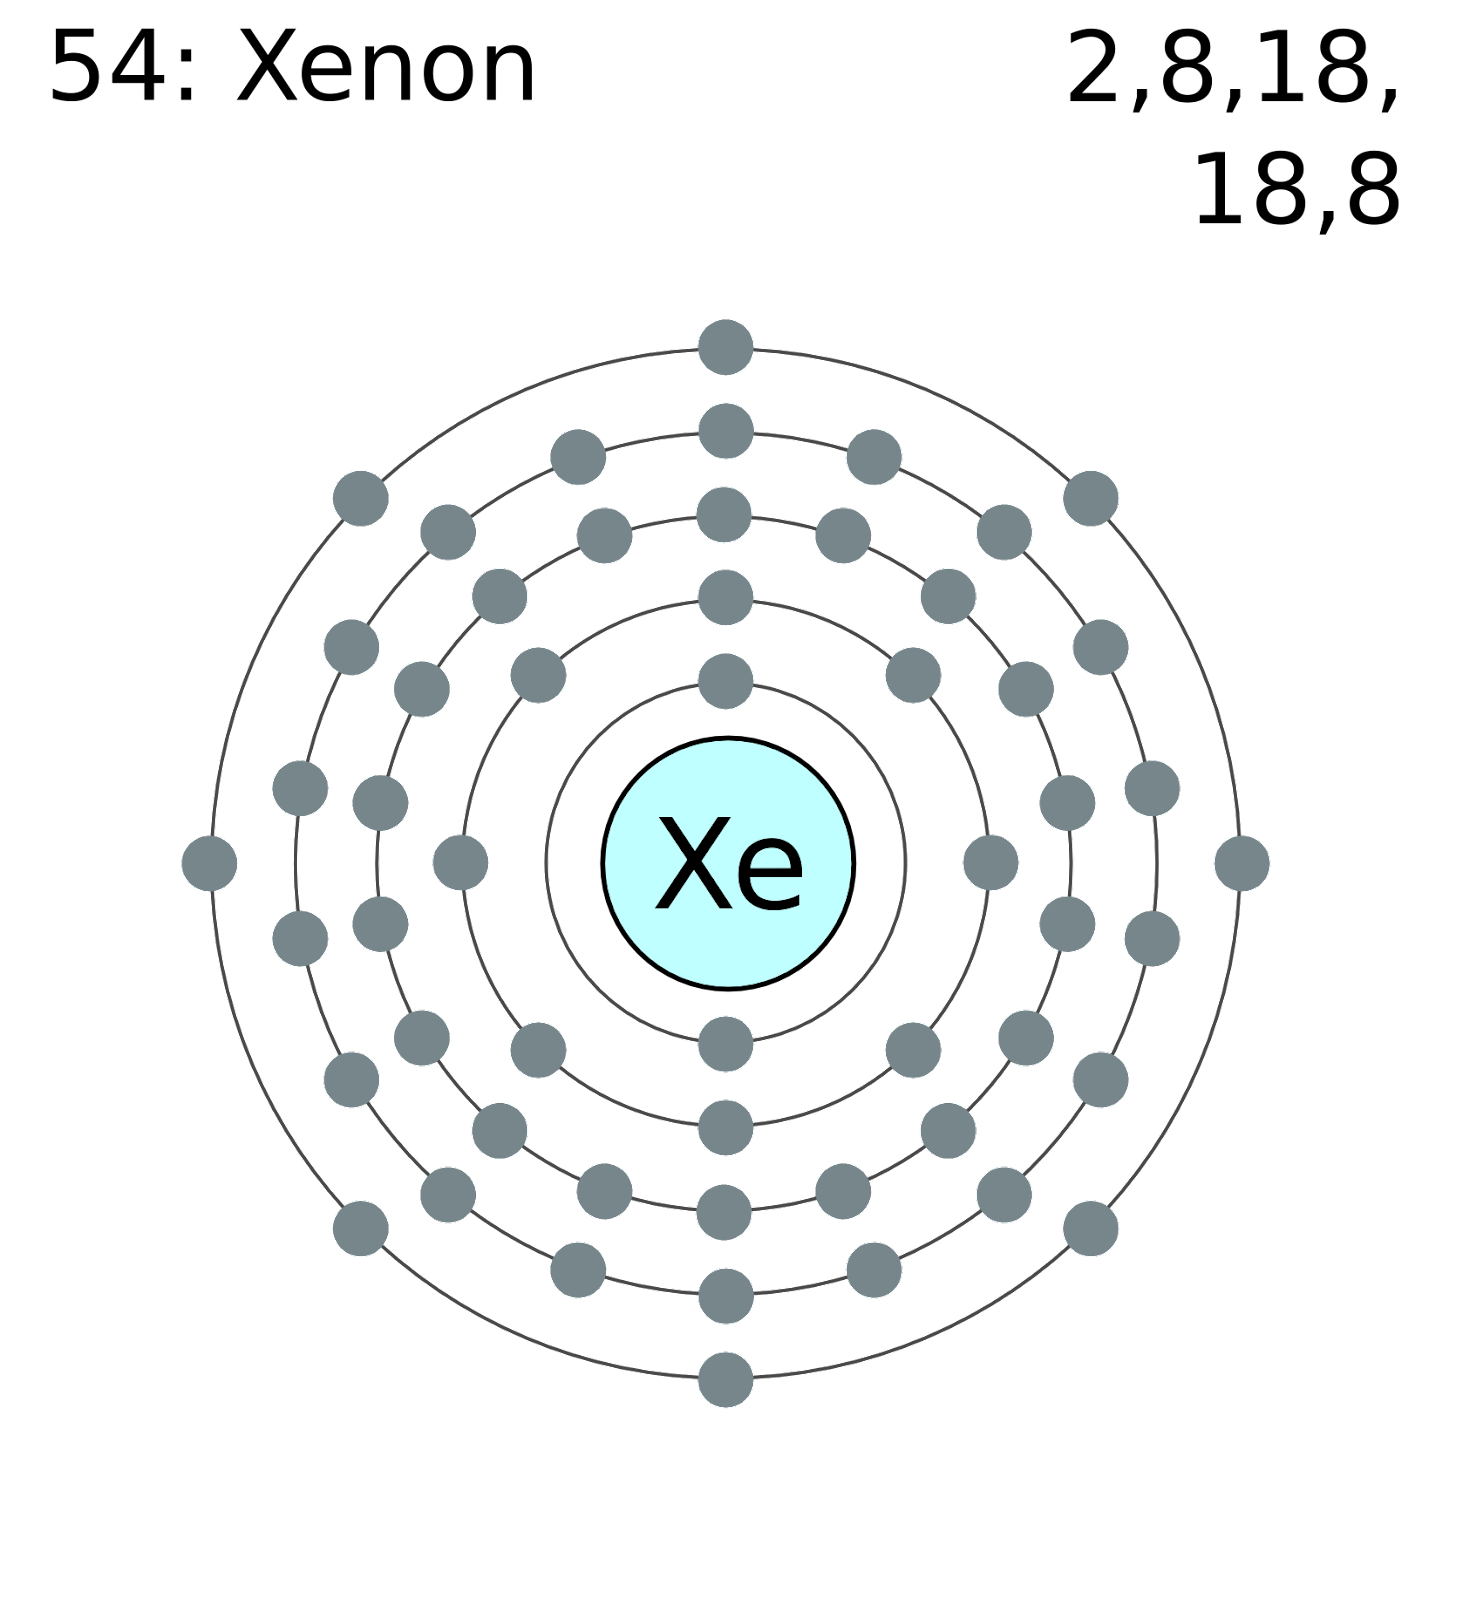 xenon difluoride Overview, Structure, Properties & Uses